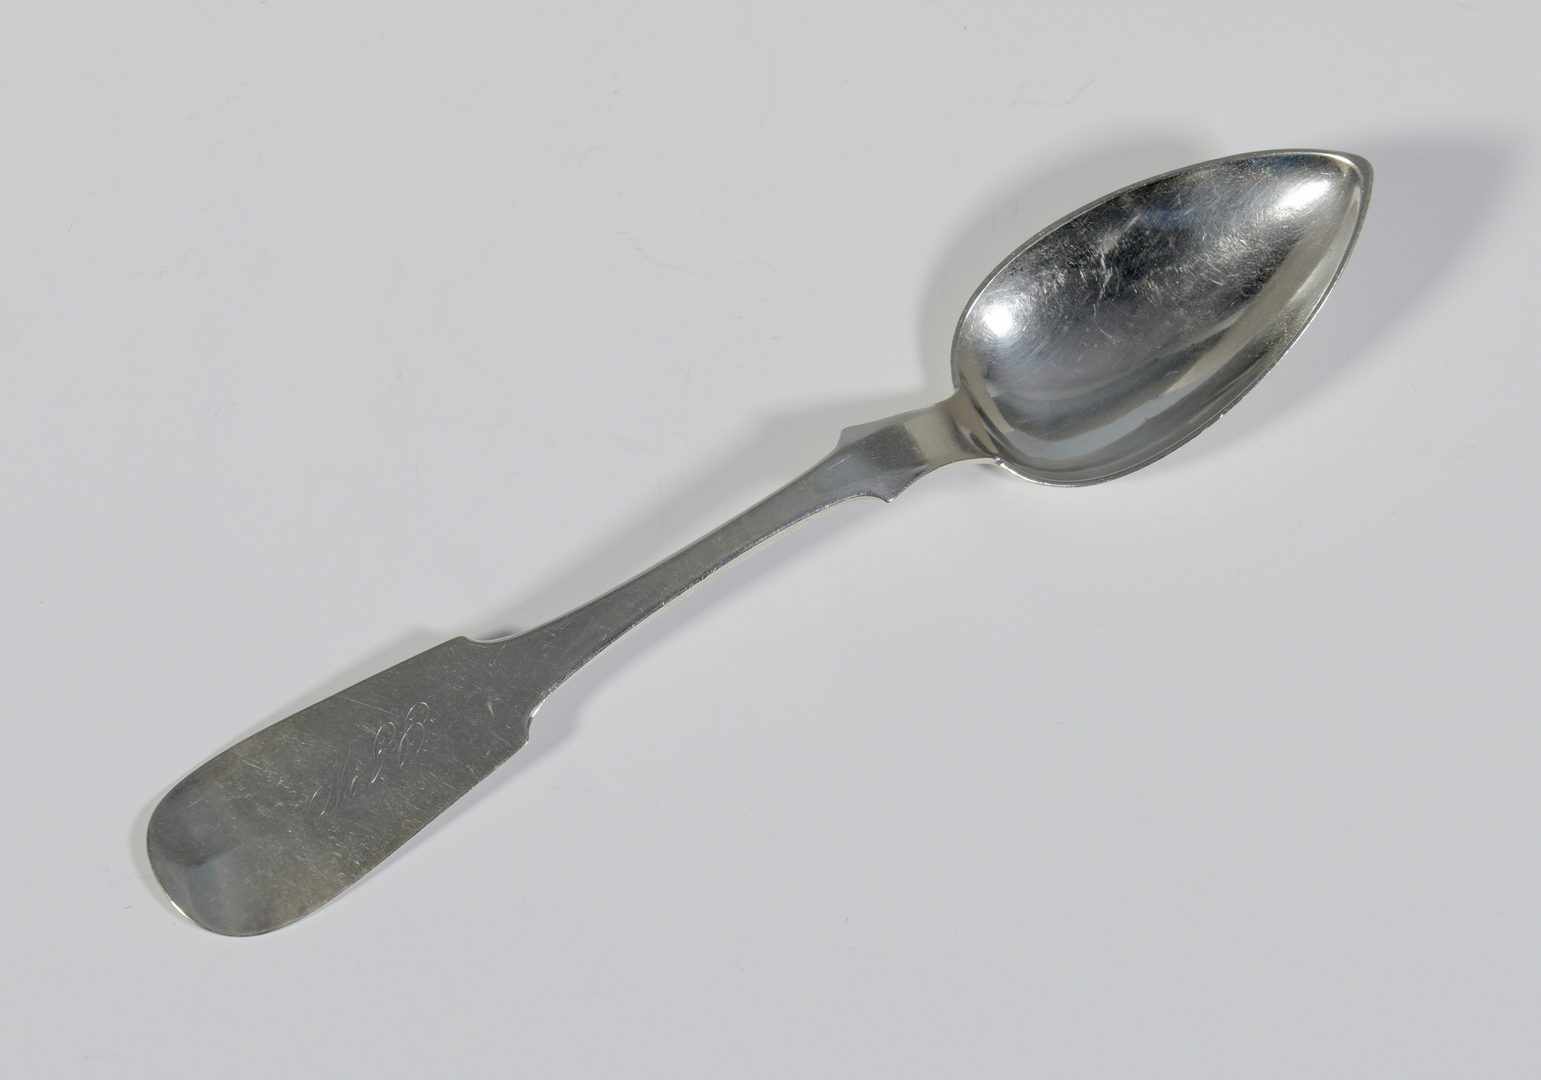 Lot 155: 12 Columbia, TN Coin Silver Spoons